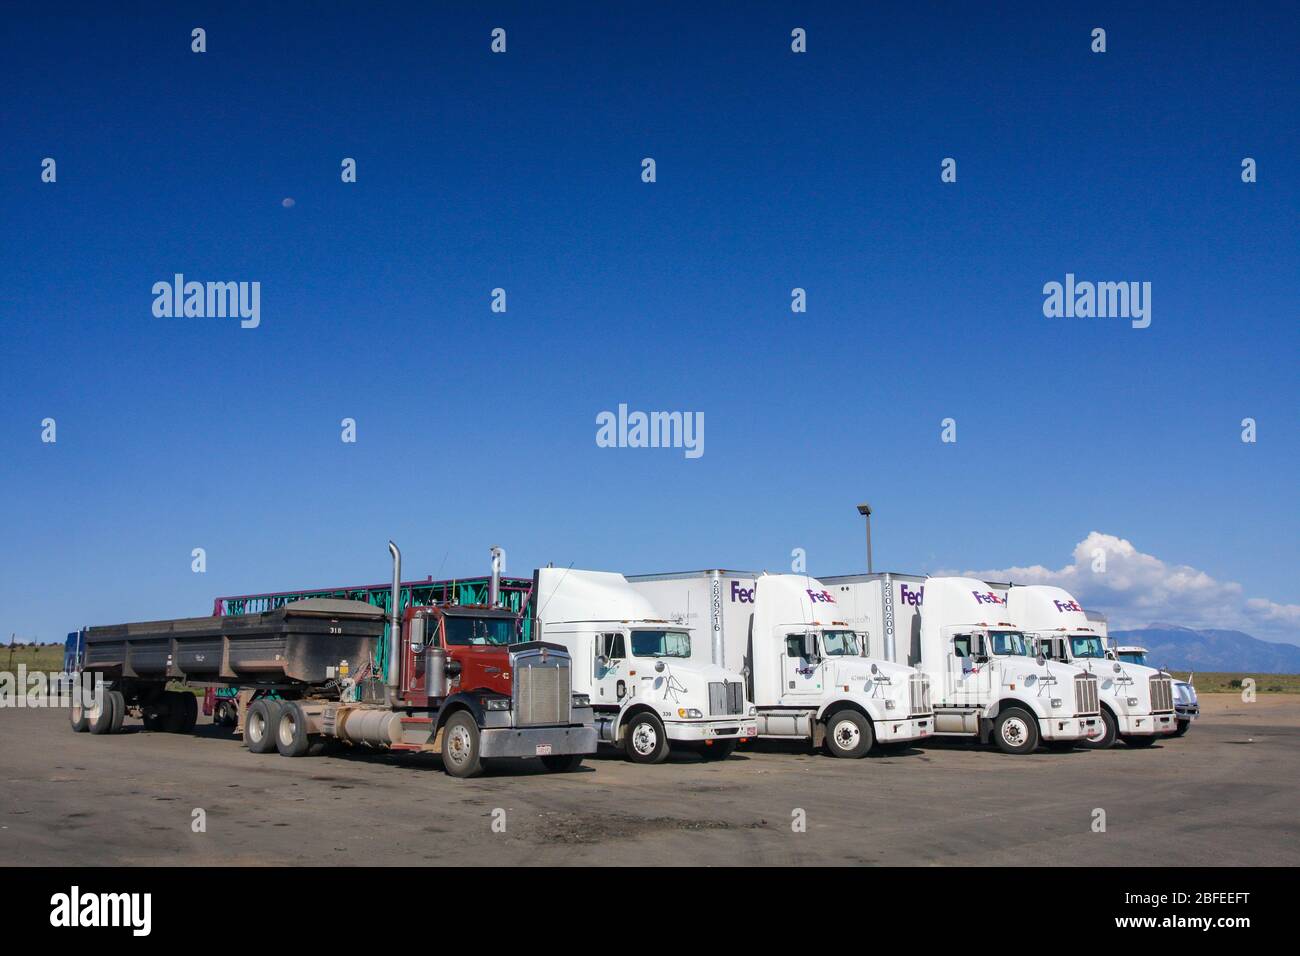 Fedex delivery trucks parked in row. Side view of cabins and trailers at highway rest stop under blue sky. American transport freight delivery vehicle Stock Photo